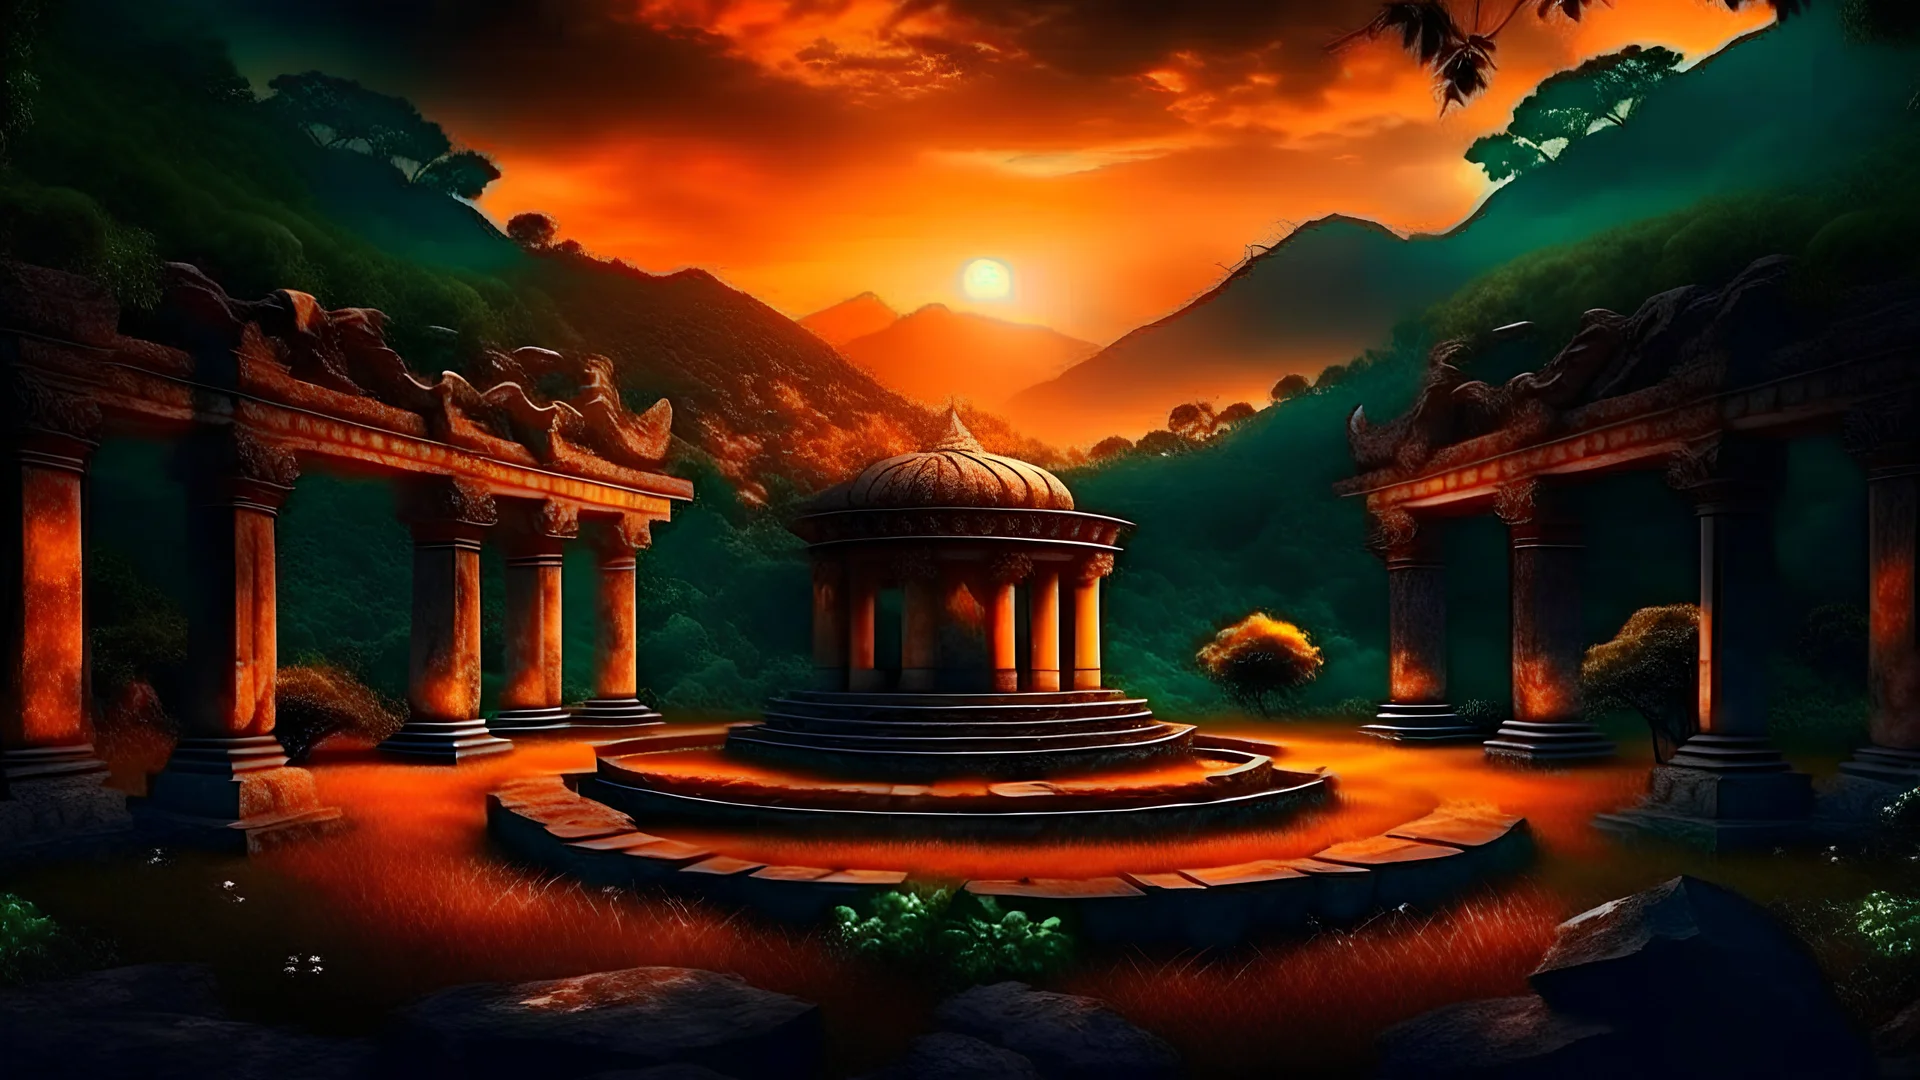 meditation round podium . my dreams . day landscape day landscape, orange light colors, In the garden my mind bows . meditation .The ruins of a village in the midst in the jungle , mountains. space color is dark , where you can see the fire and smell the smoke, galaxy, space, ethereal space, cosmos, panorama. Palace , Background: An otherworldly planet, bathed in the cold glow of distant stars. Northern Lights dancing above the clouds in papua new guinea.